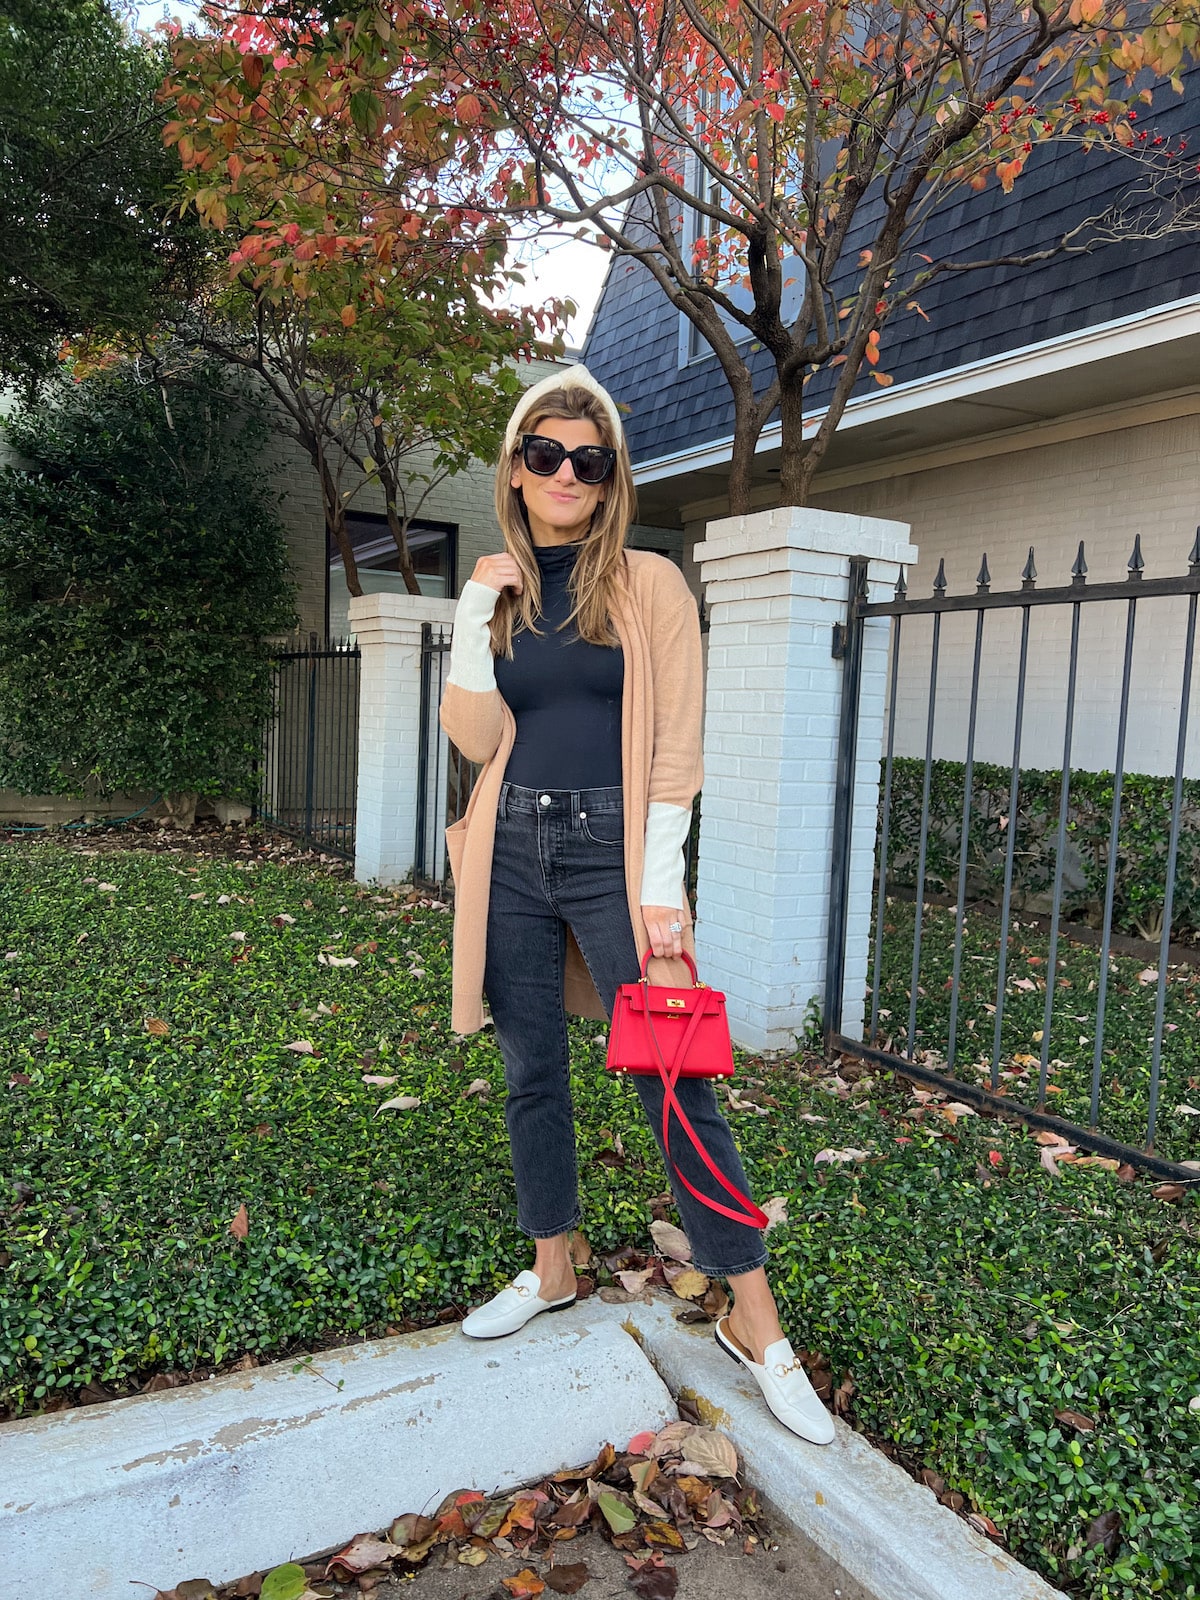 Brighton Butler wearing ParrishLA colorblock cardigan with madewell black jeans and red bag